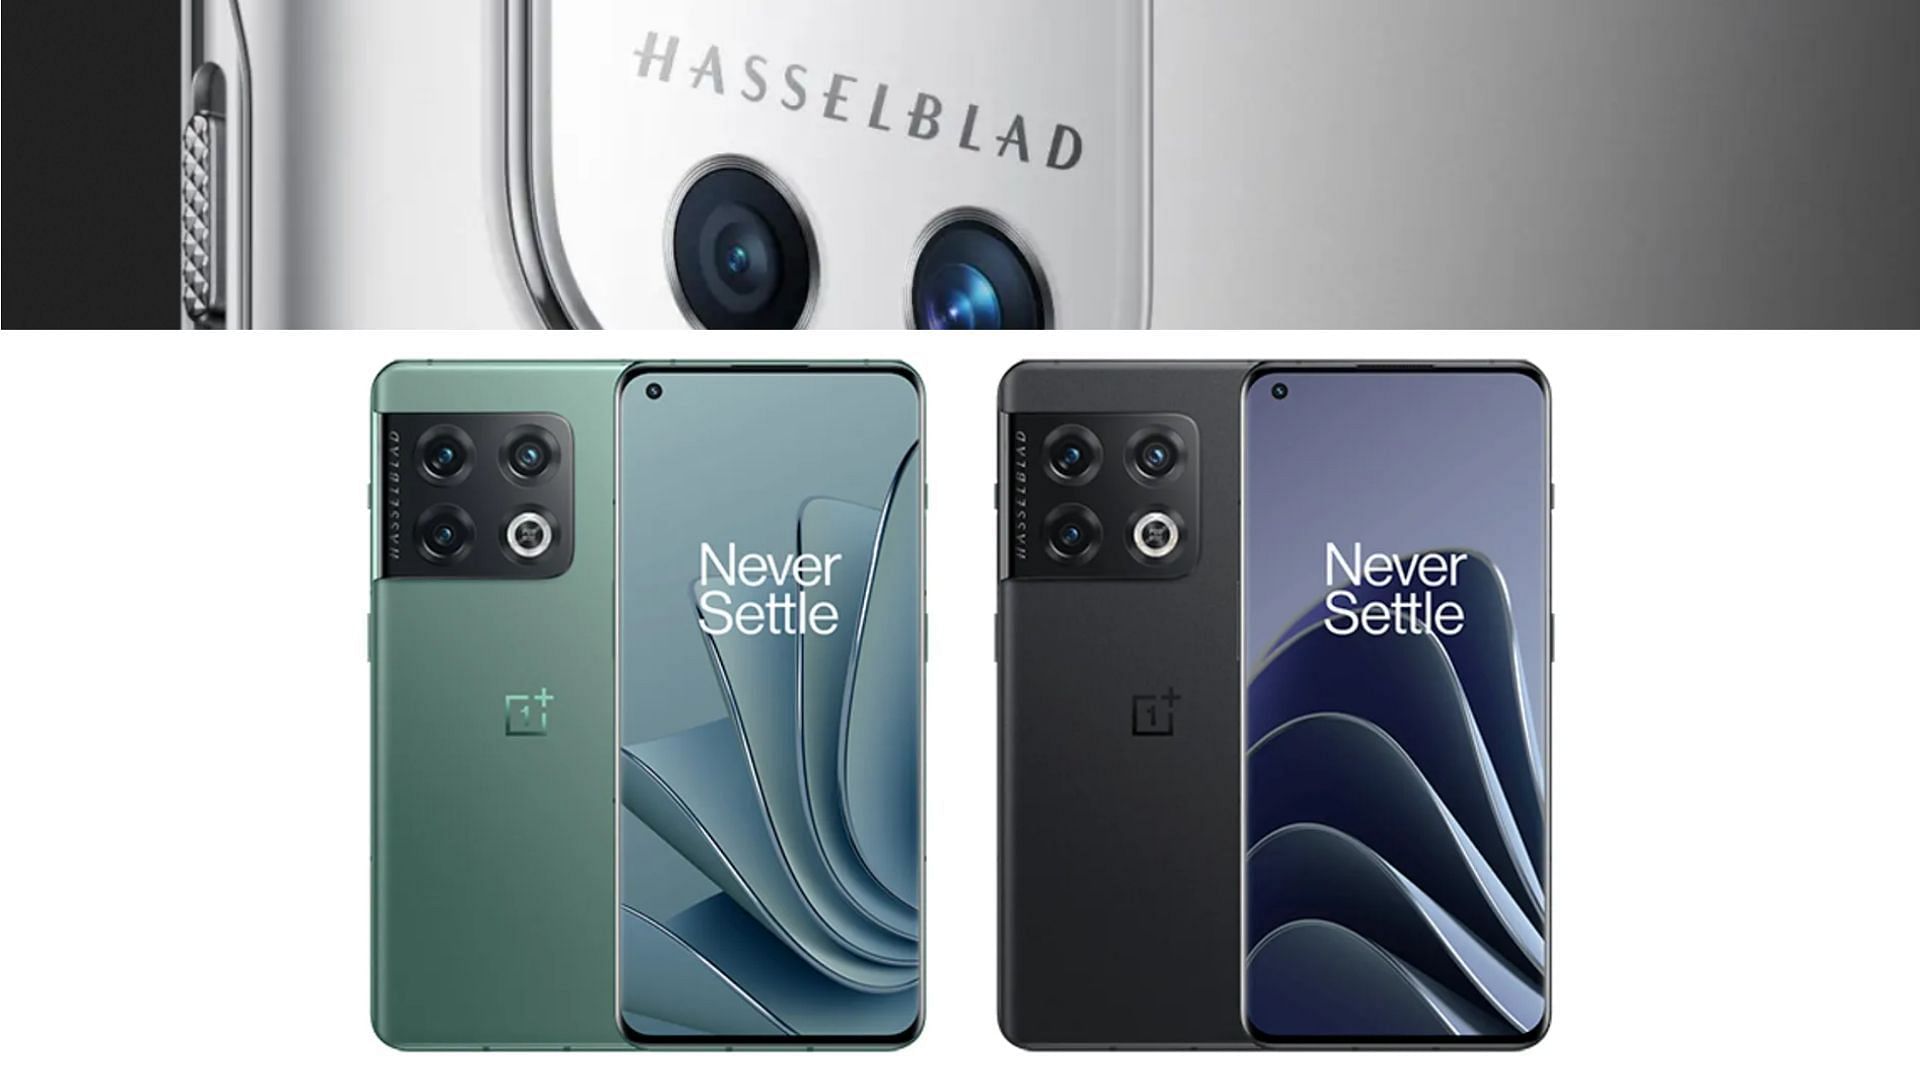 Alert slider is making a comeback (image by Hasselblad and OnePlus)